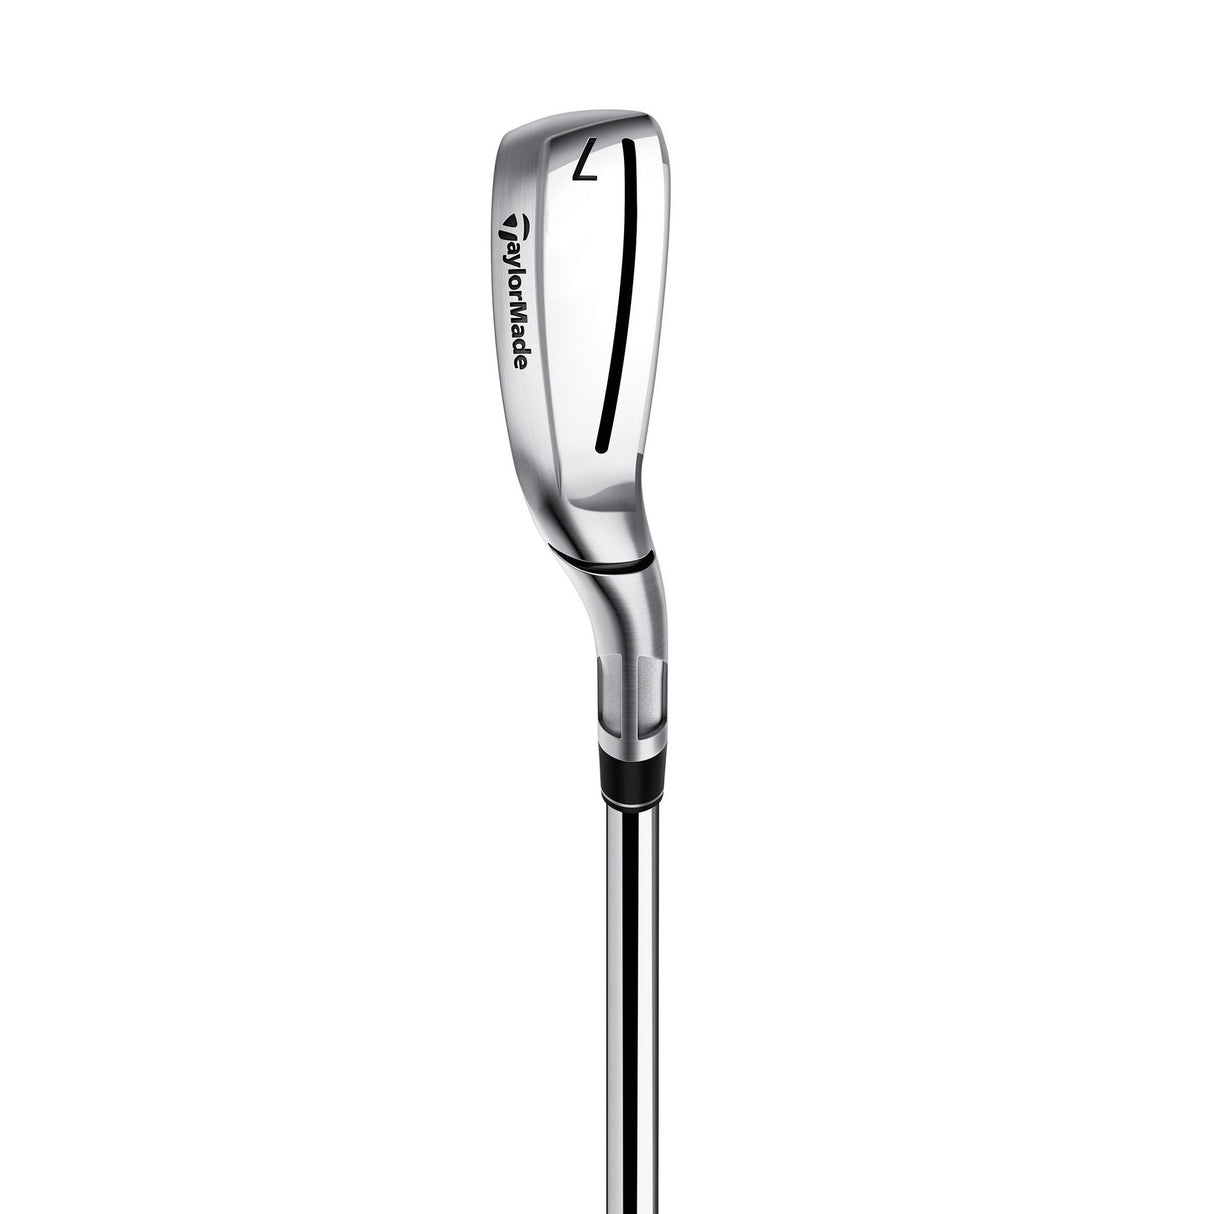 TaylorMade Stealth HD Iron Set with Graphite Shafts - Niagara Golf Warehouse TAYLORMADE Iron Sets